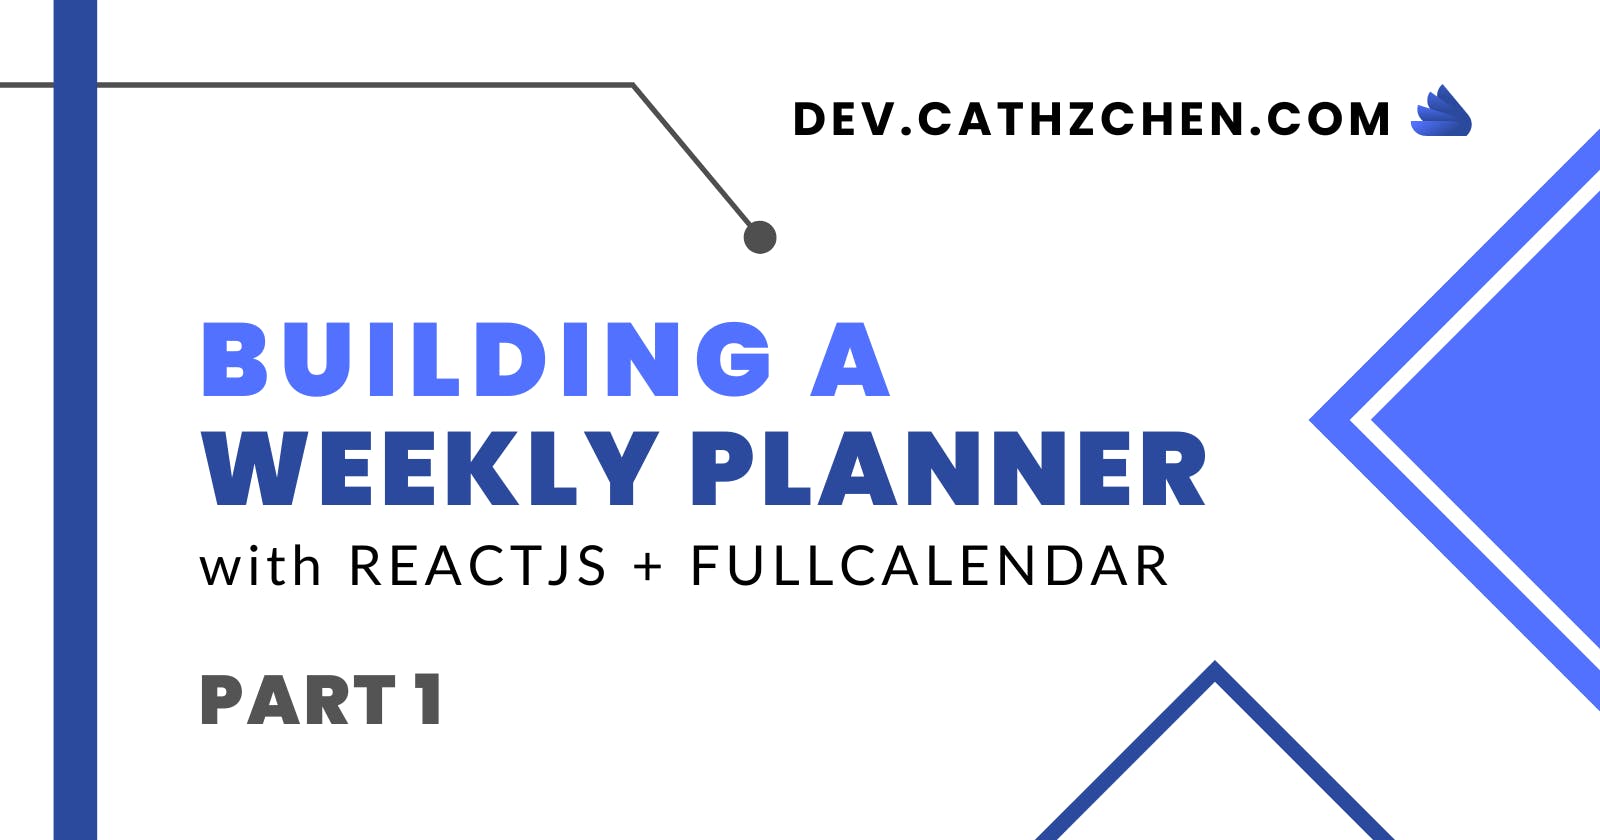 Building a Weekly Planner App with ReactJS + FullCalendar: Project Setup (Part 1)